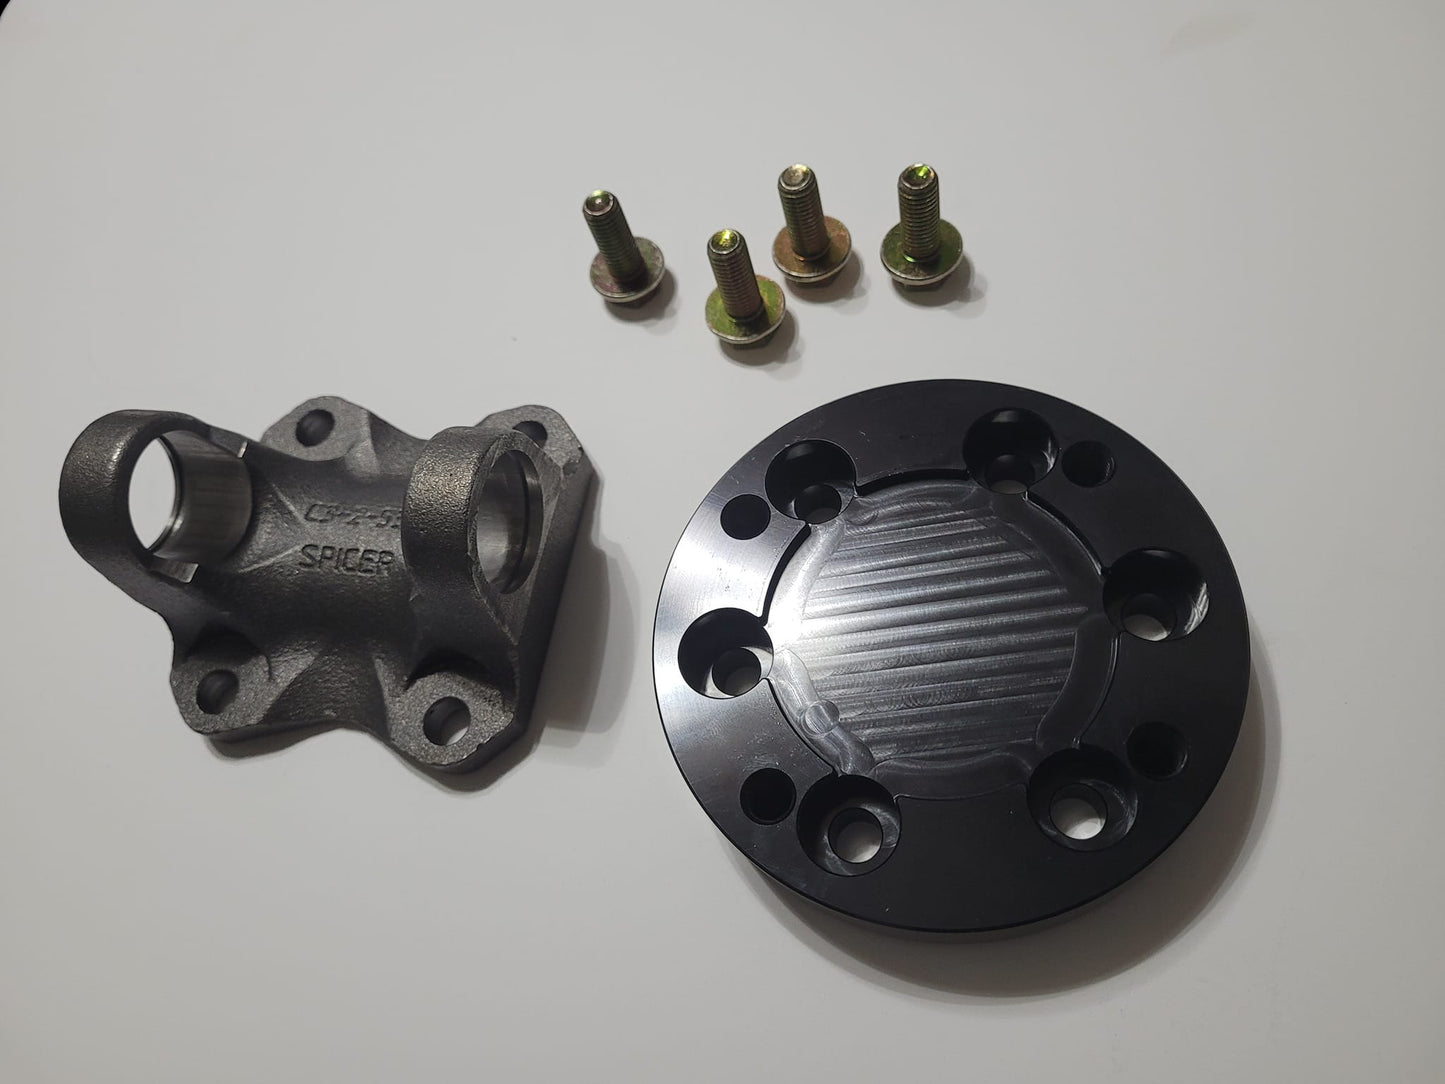 E60 differential adapter